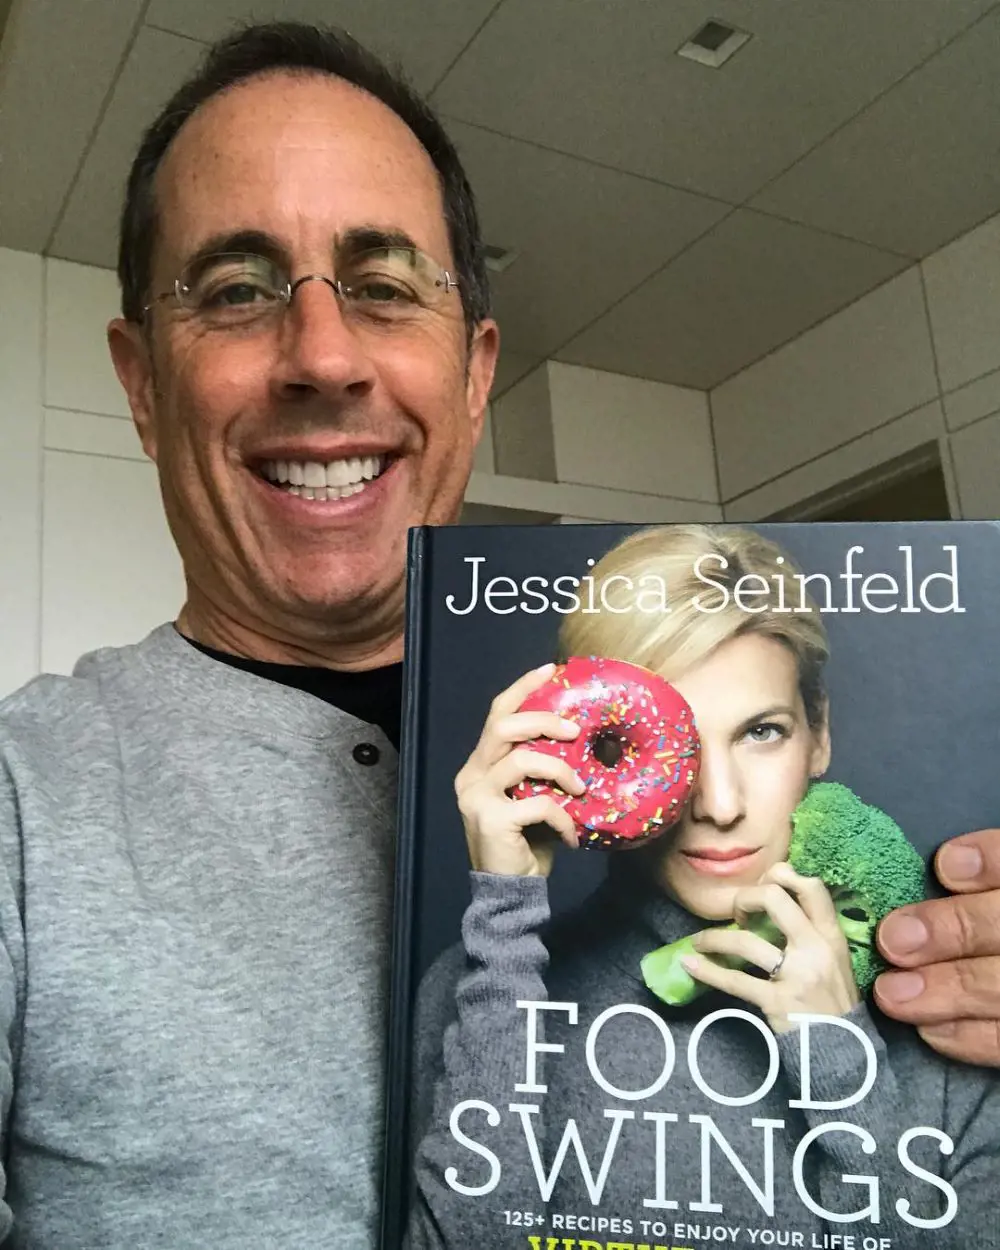 The actor holding his wife, Jessica Seinfeld's, new book titled 